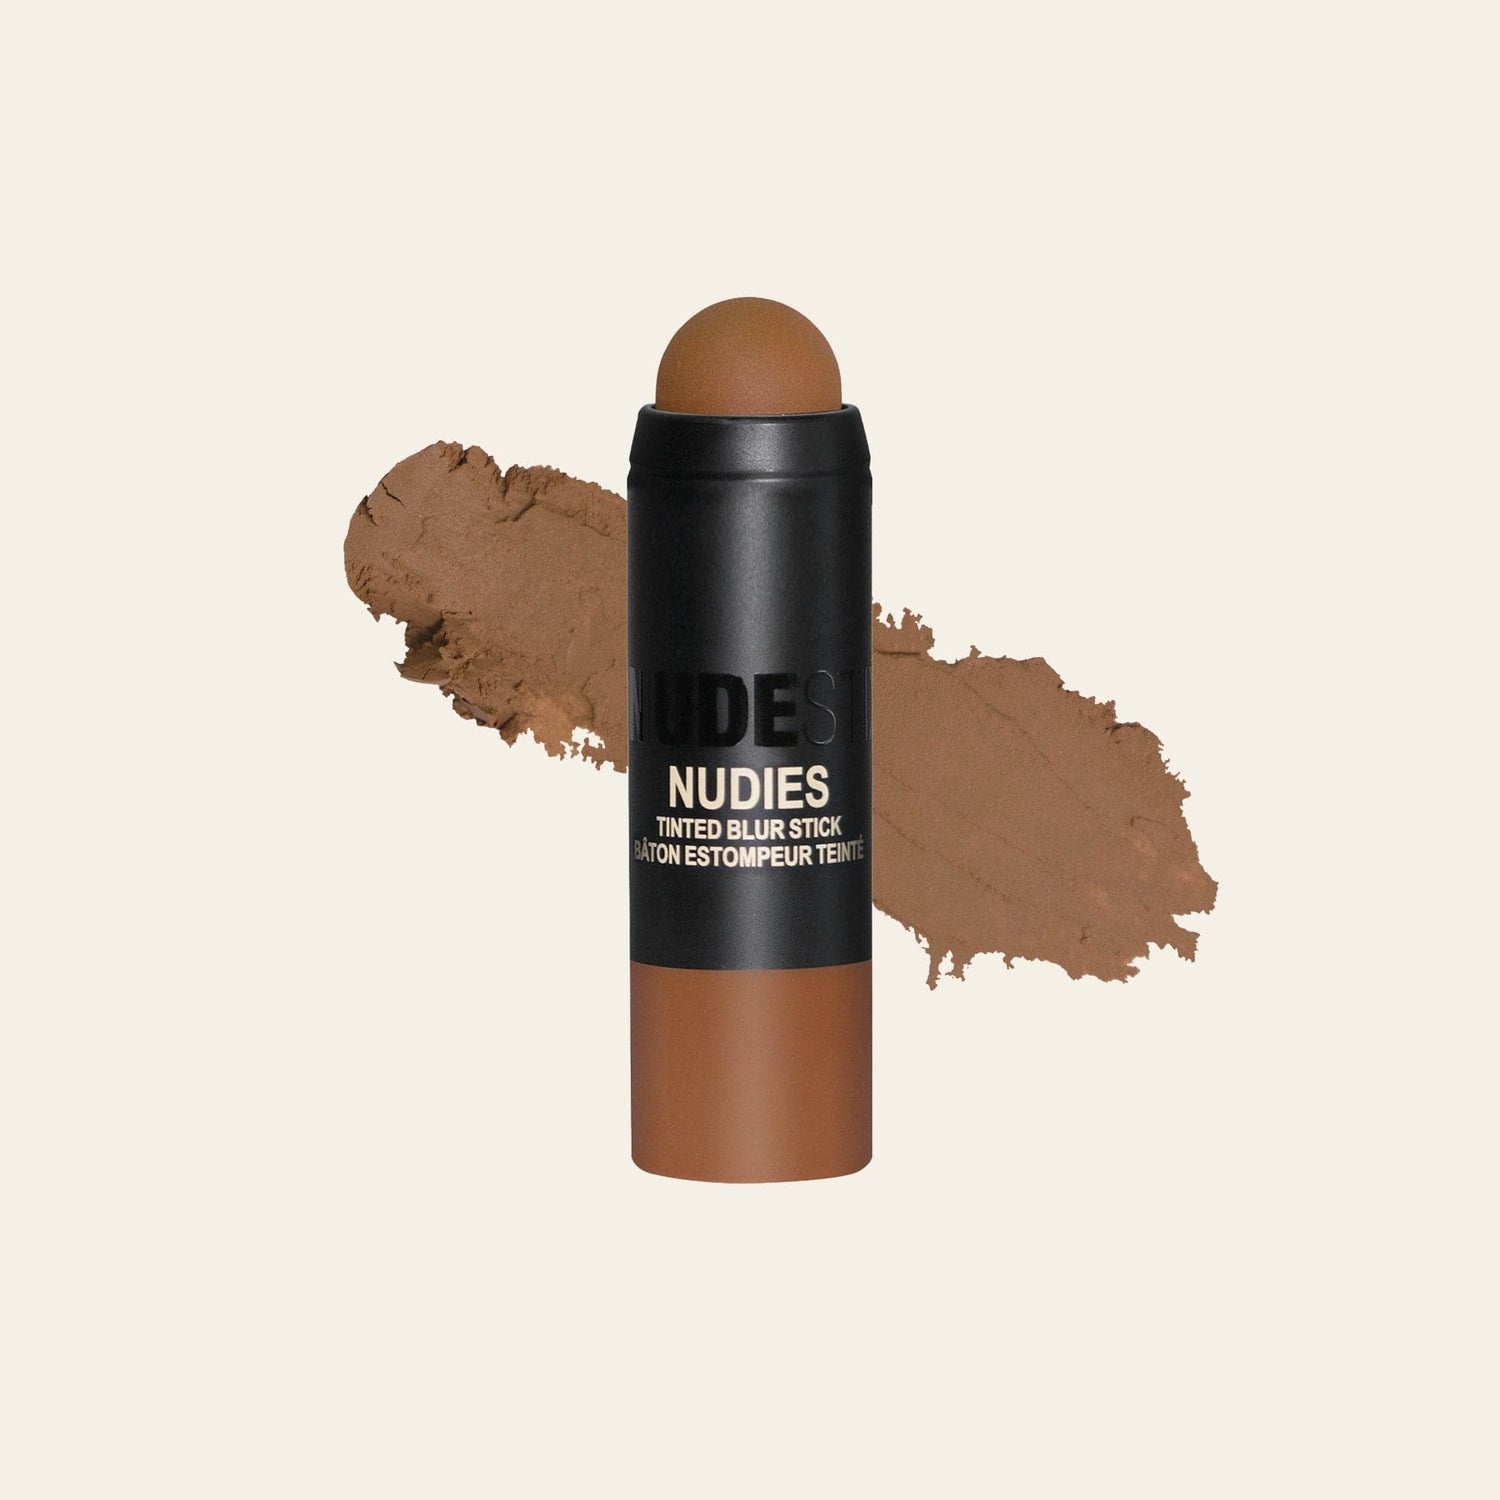 Tinted Blur Foundation Stick in shade Deep 8